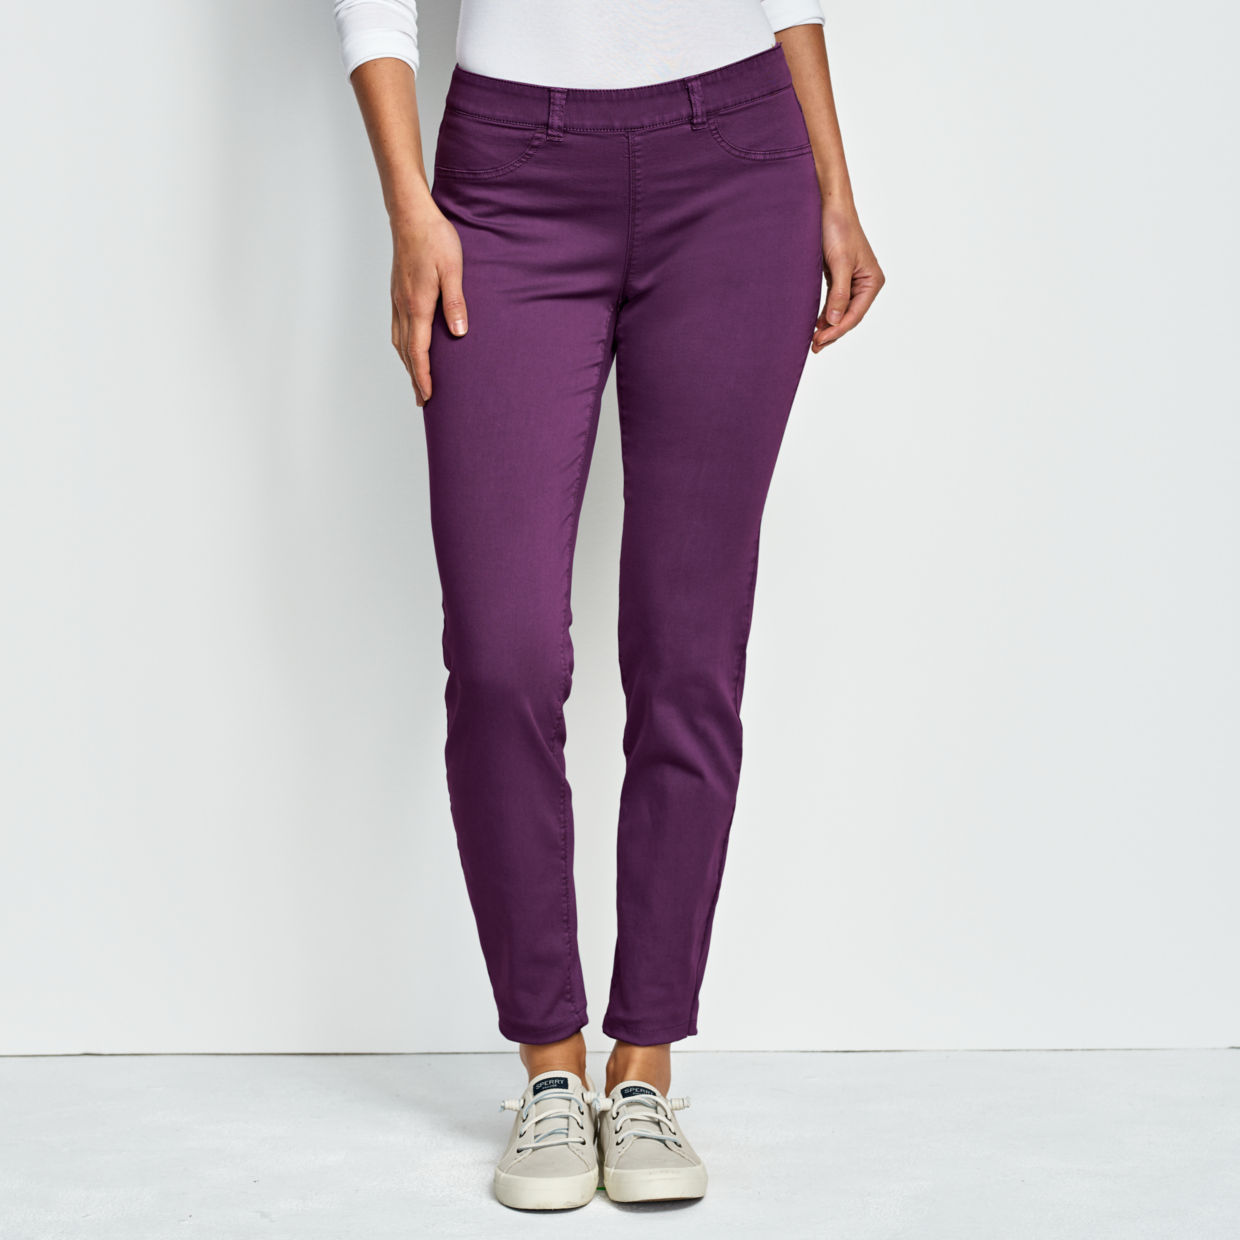 All-Day Stretch Twill Ankle Pants